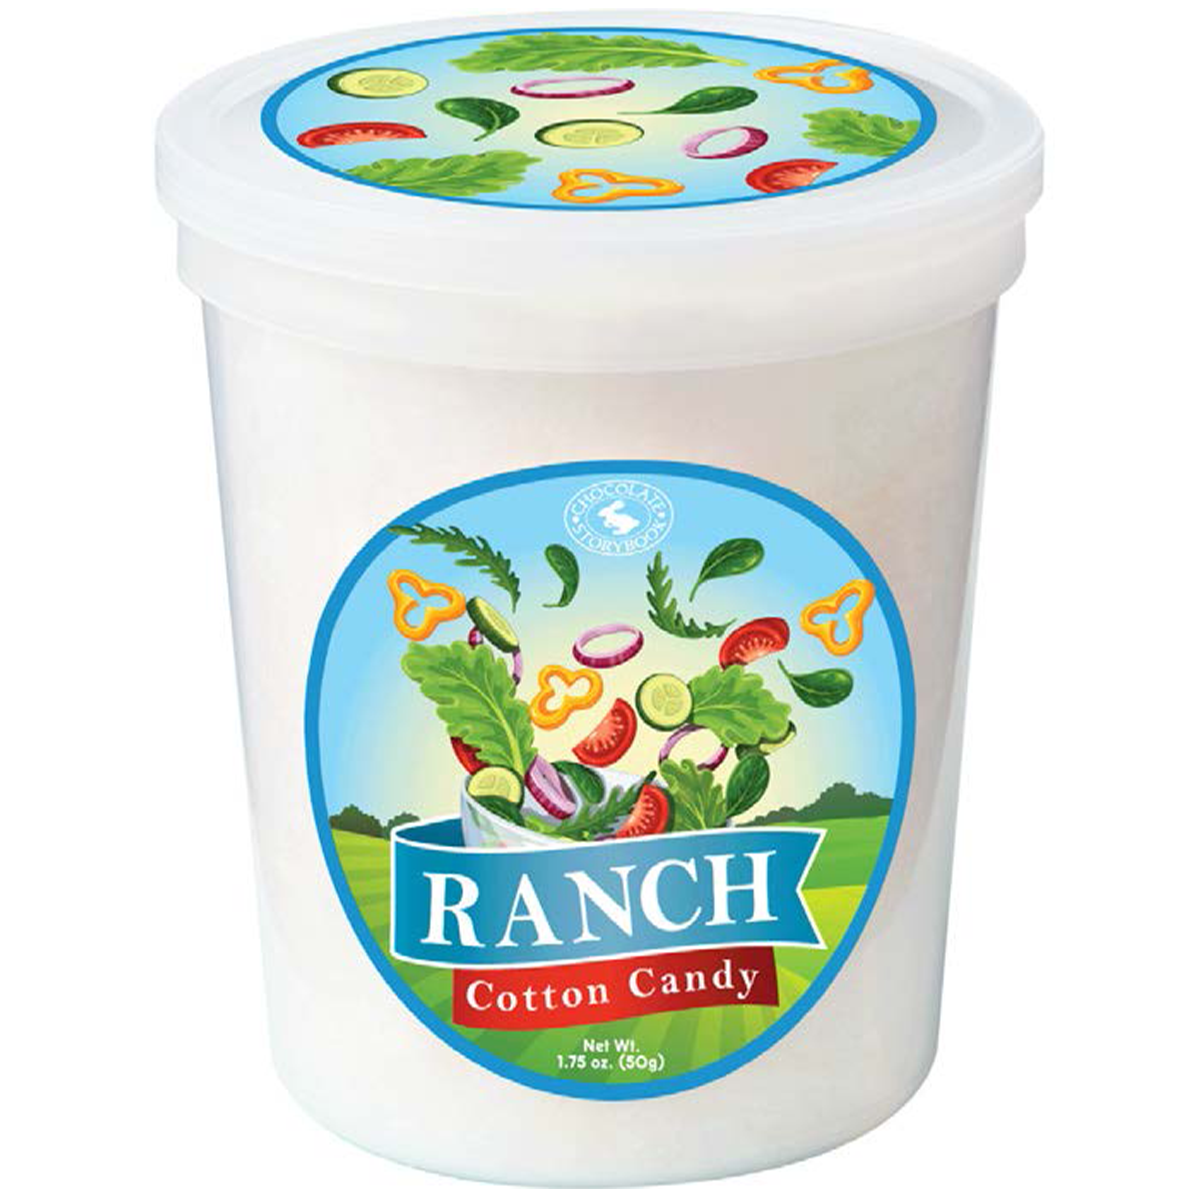 Ranch Cotton Candy